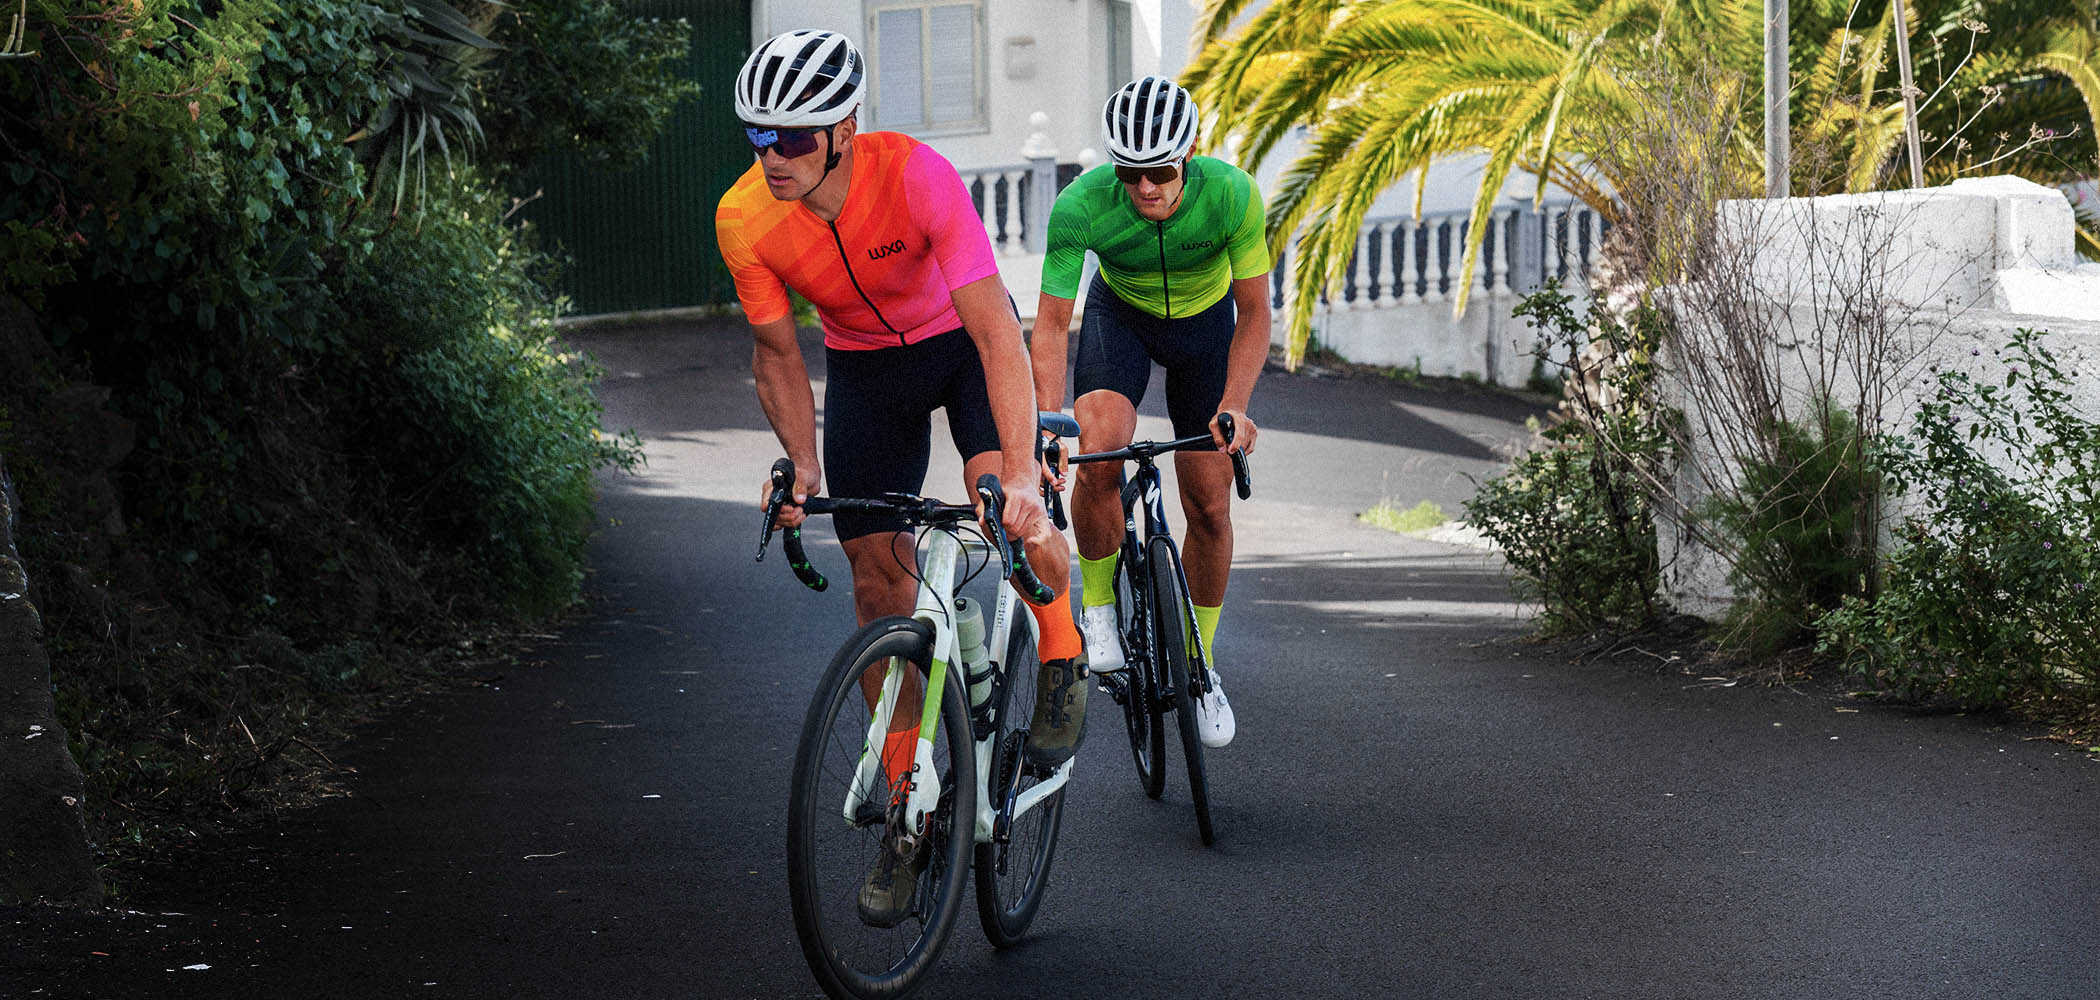 Cyclists dressed in Luxa cycling uniforms wear matching cycling socks in the same colors